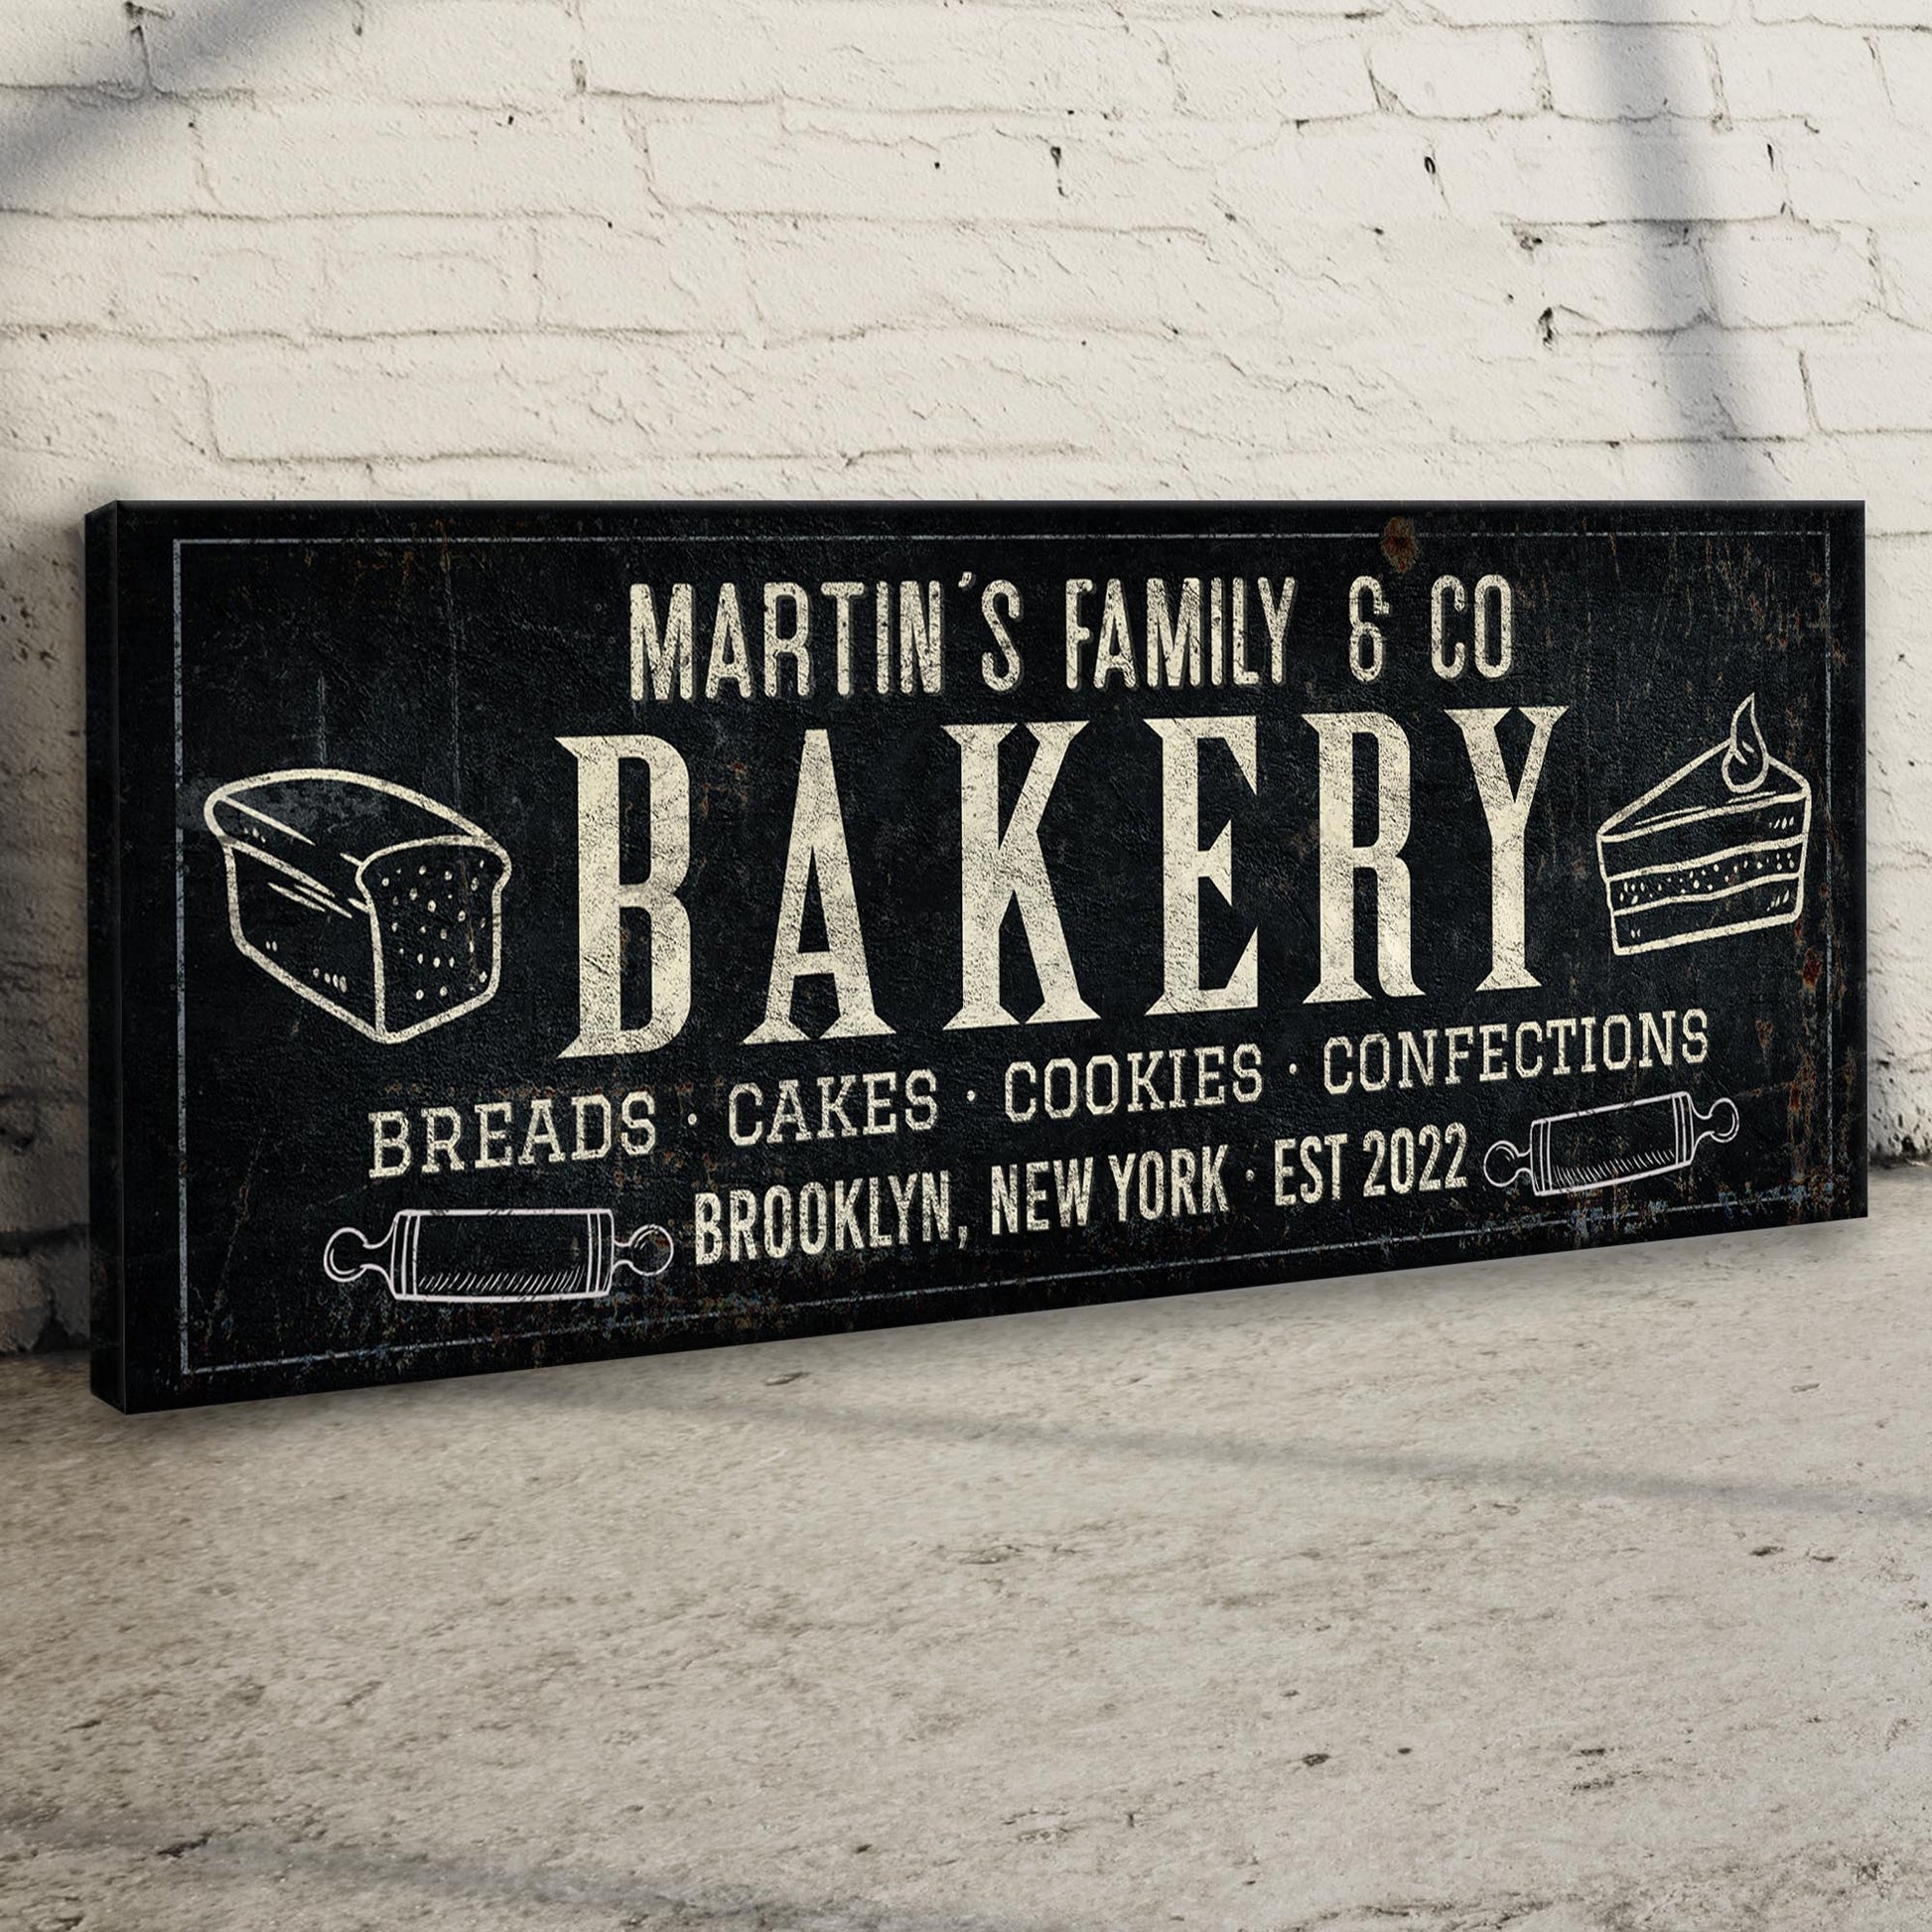 Breads, Cakes, Cookies, Confections Bakery Sign Style 1 - Image by Tailored Canvases